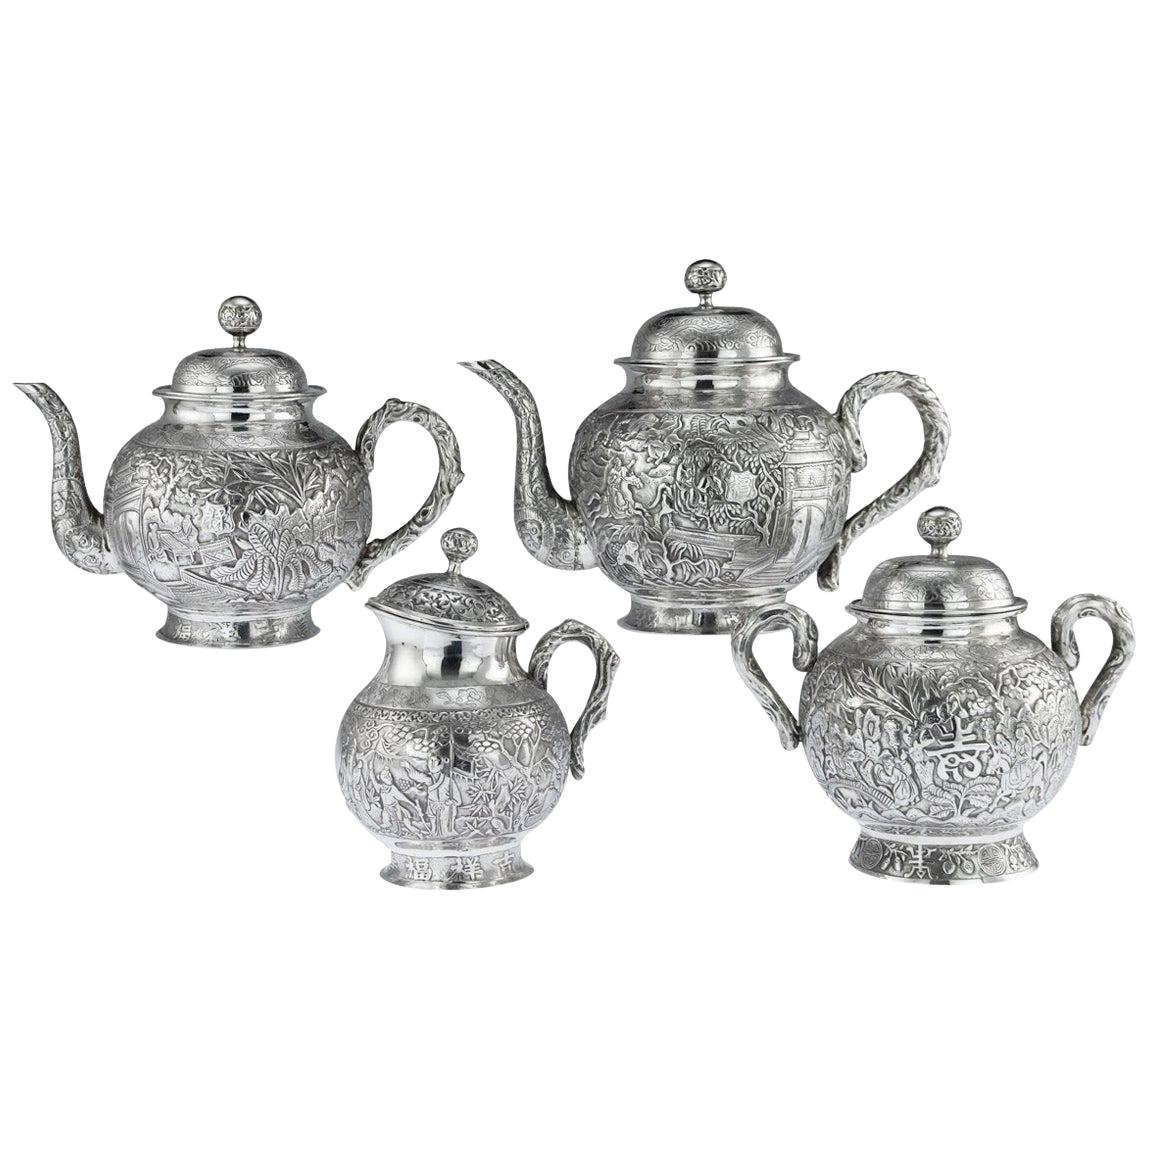 19th Century Chinese Exceptional Solid Silver Tea Service, Hong Kong, circa 1890